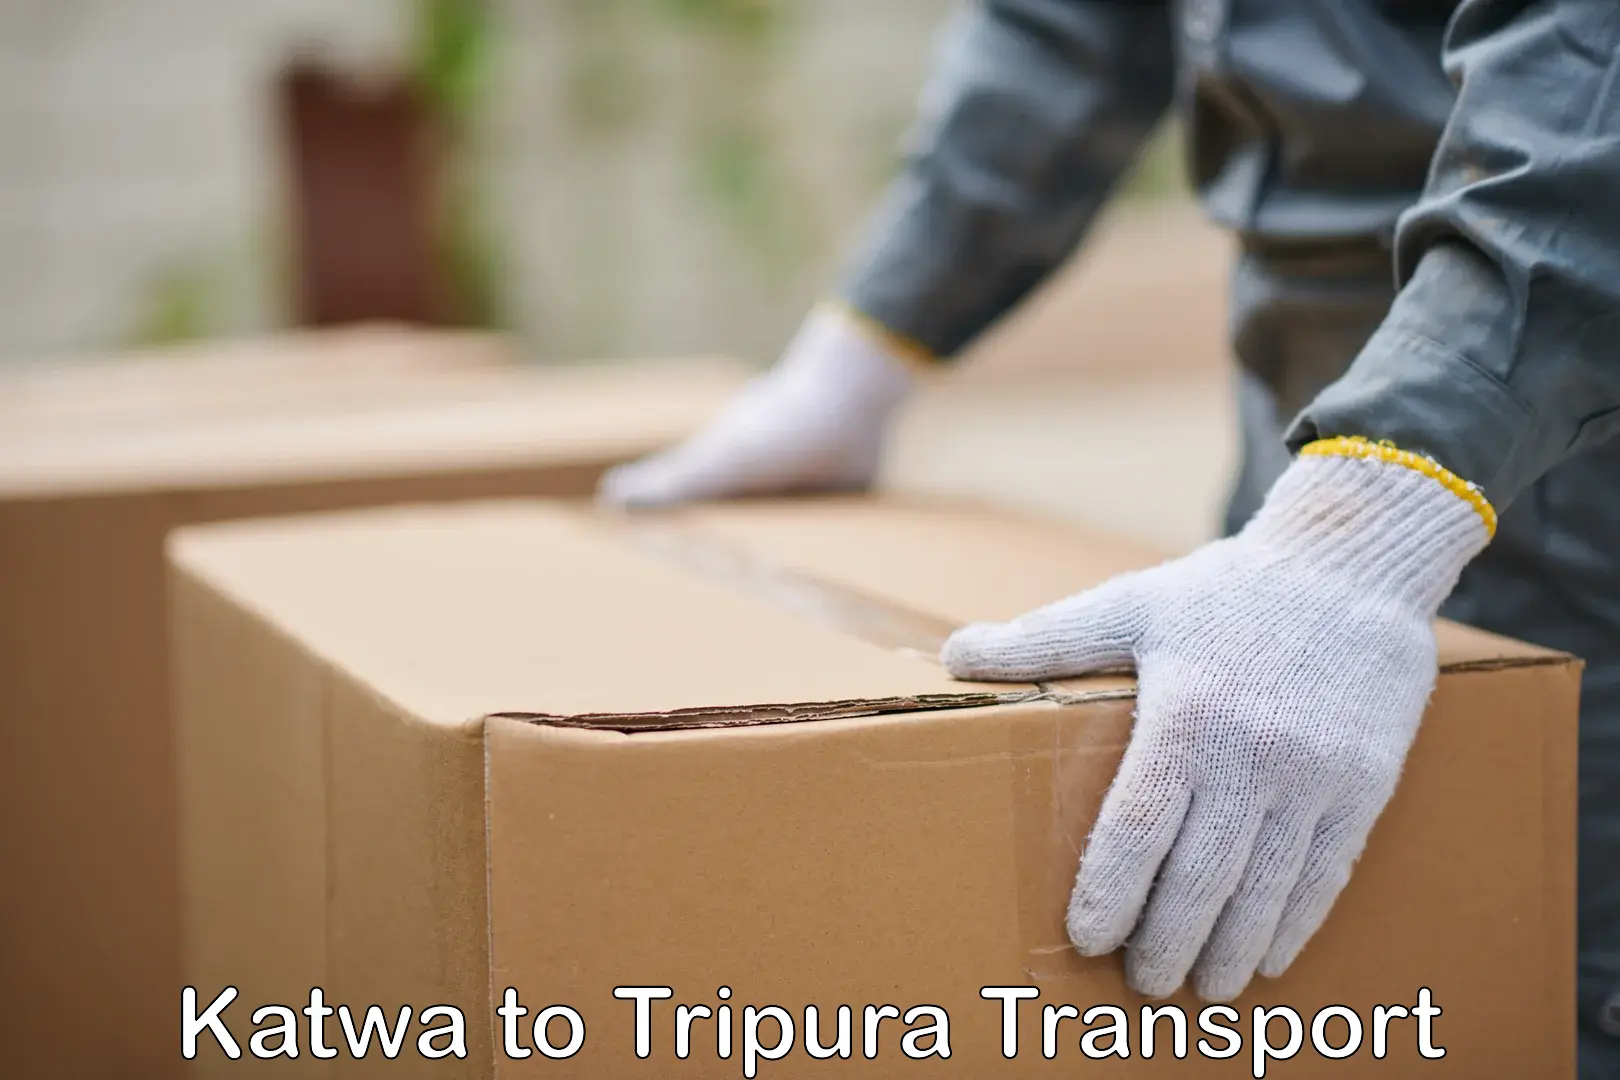 Container transportation services Katwa to Udaipur Tripura